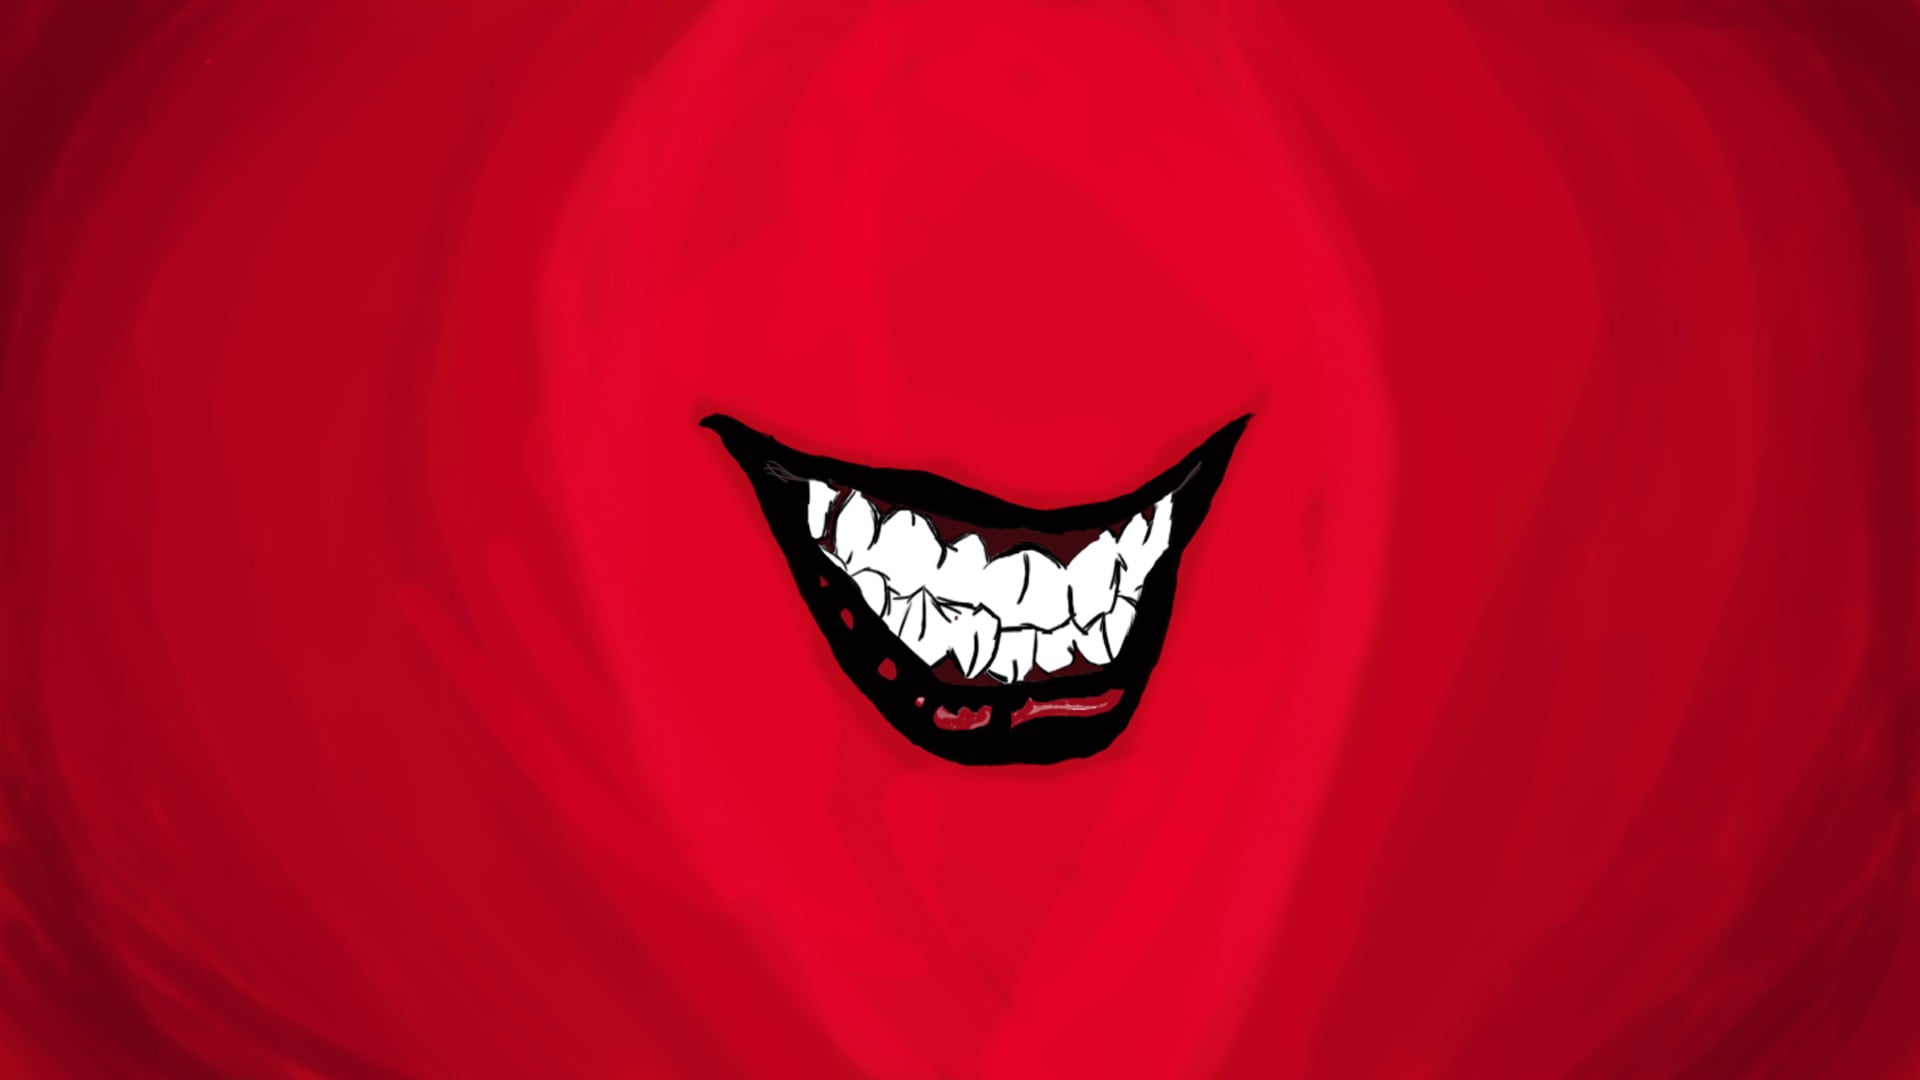 Red White And Black Smiling Teeth Illustration Joker Mouth